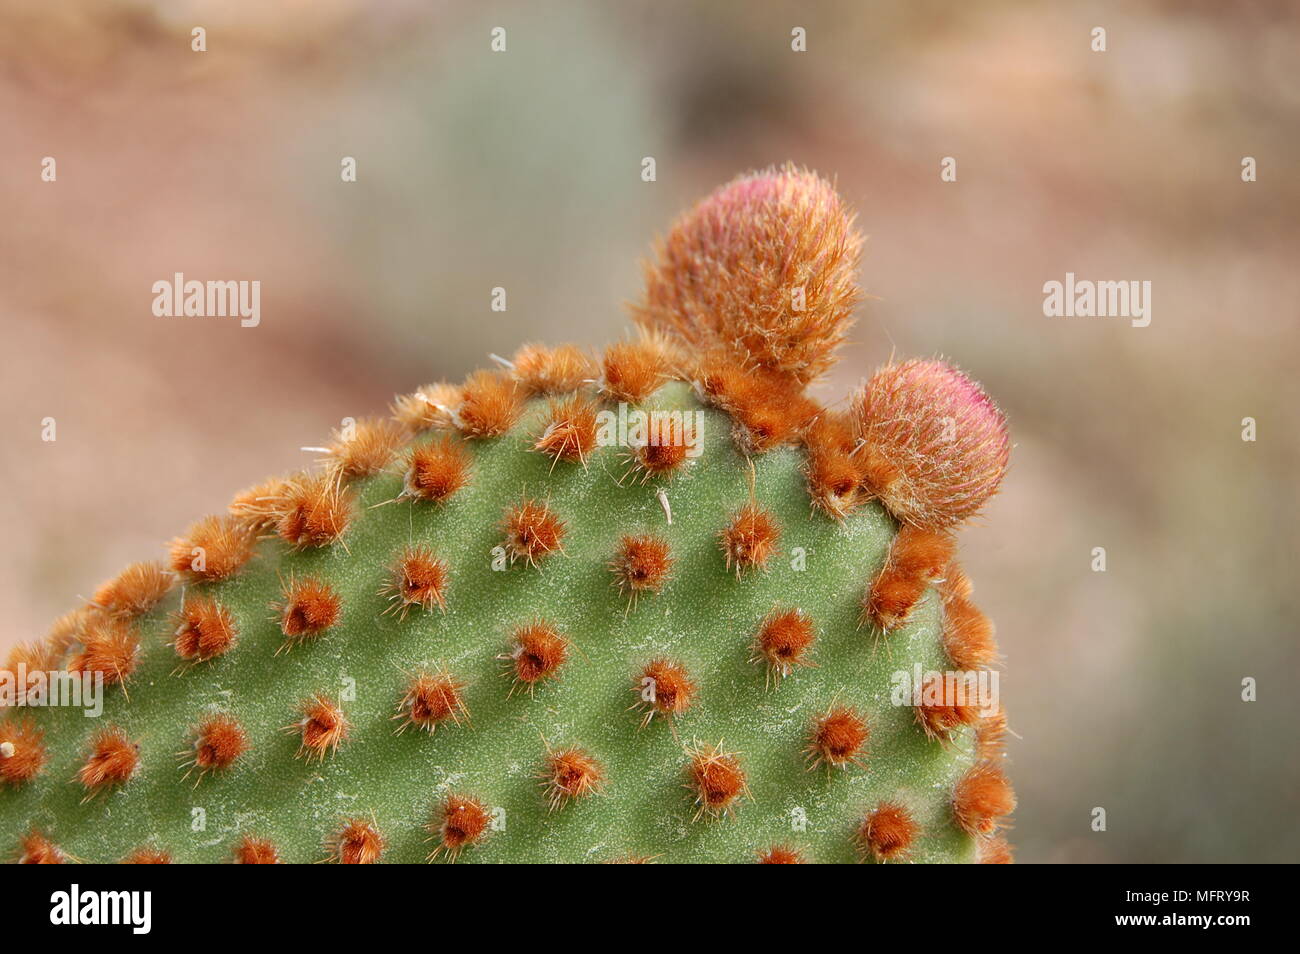 A typical blooming cactus in Spain Stock Photo